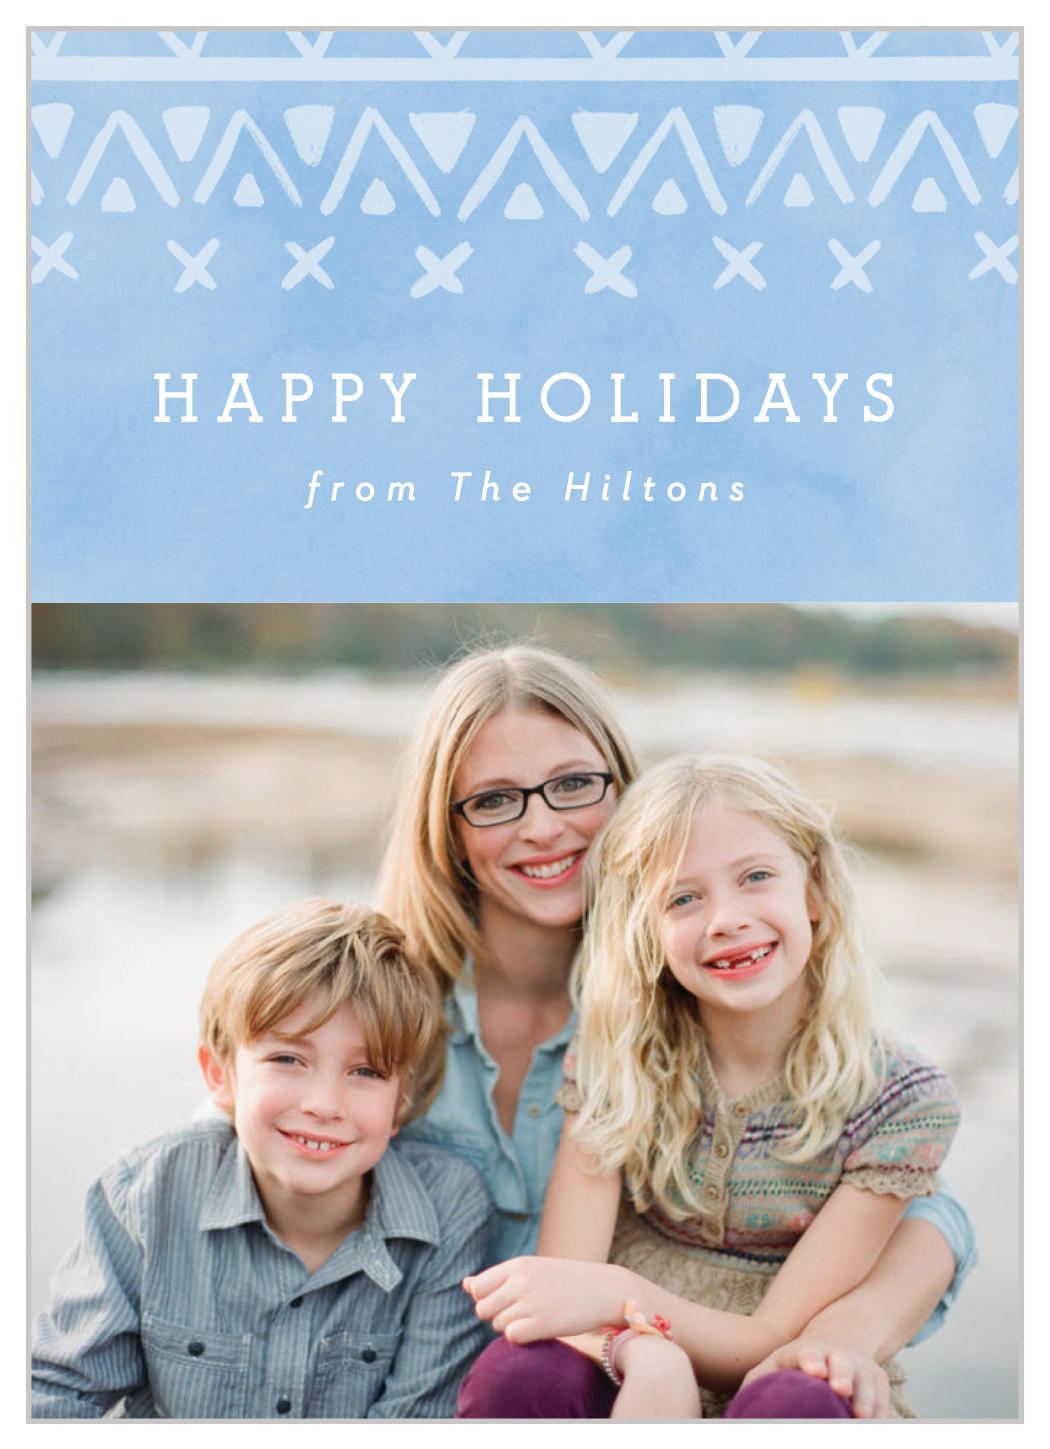 Sweater Weather Holiday Cards